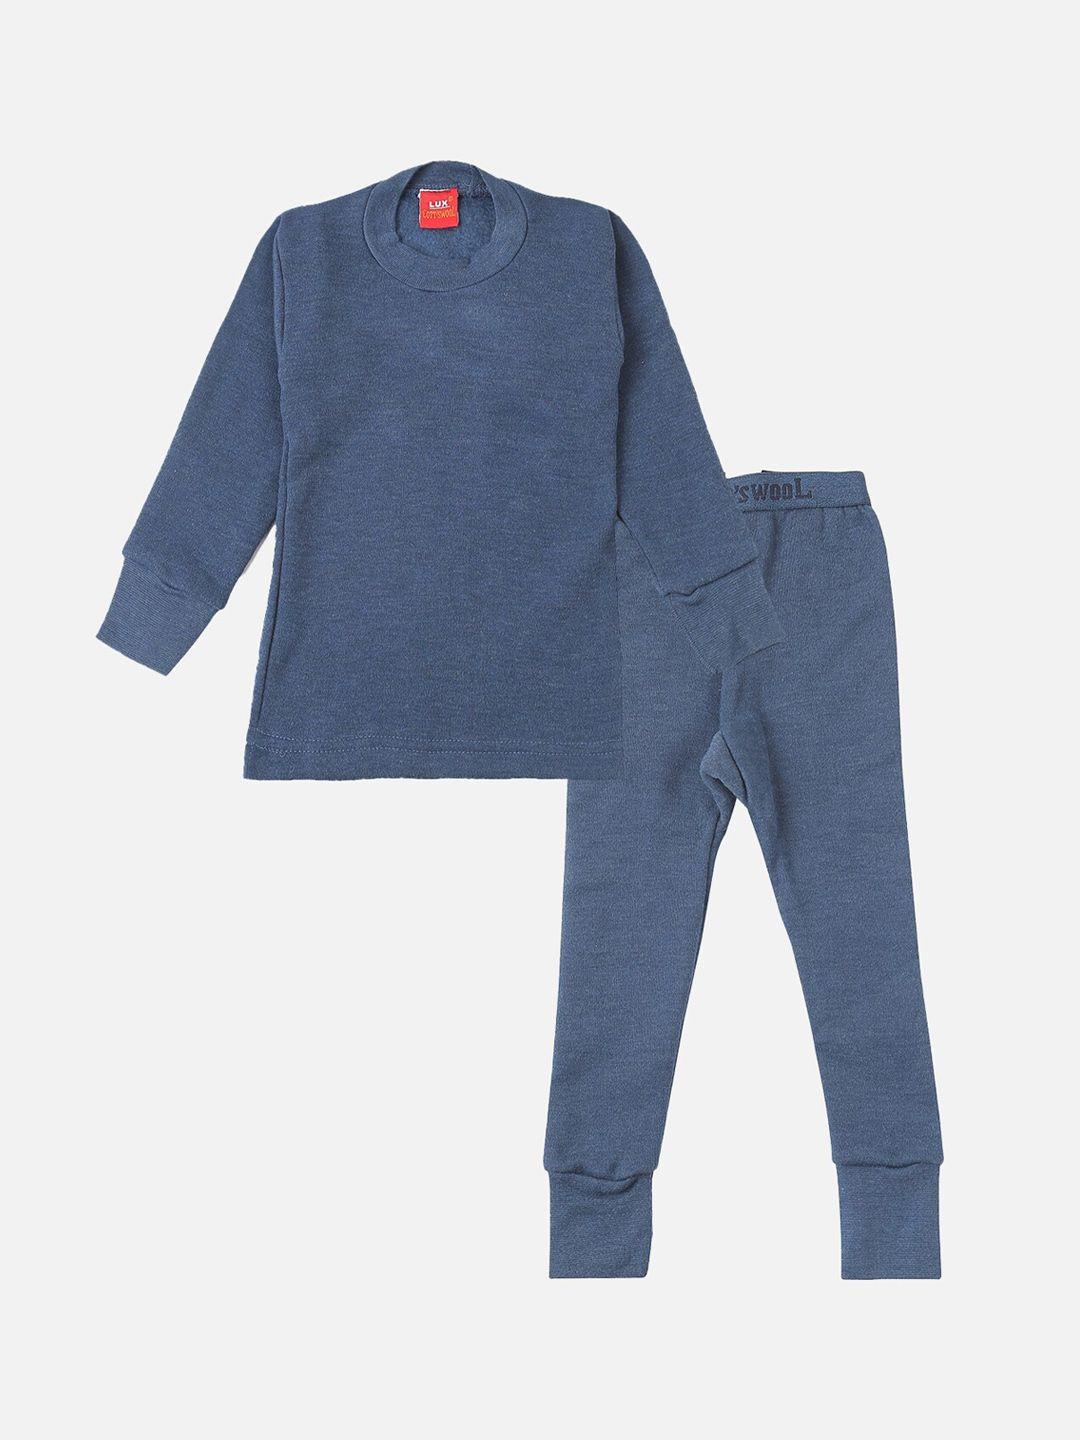 Lux Cottswool Boys Blue Solid Cotton Slim-Fit Thermal Set